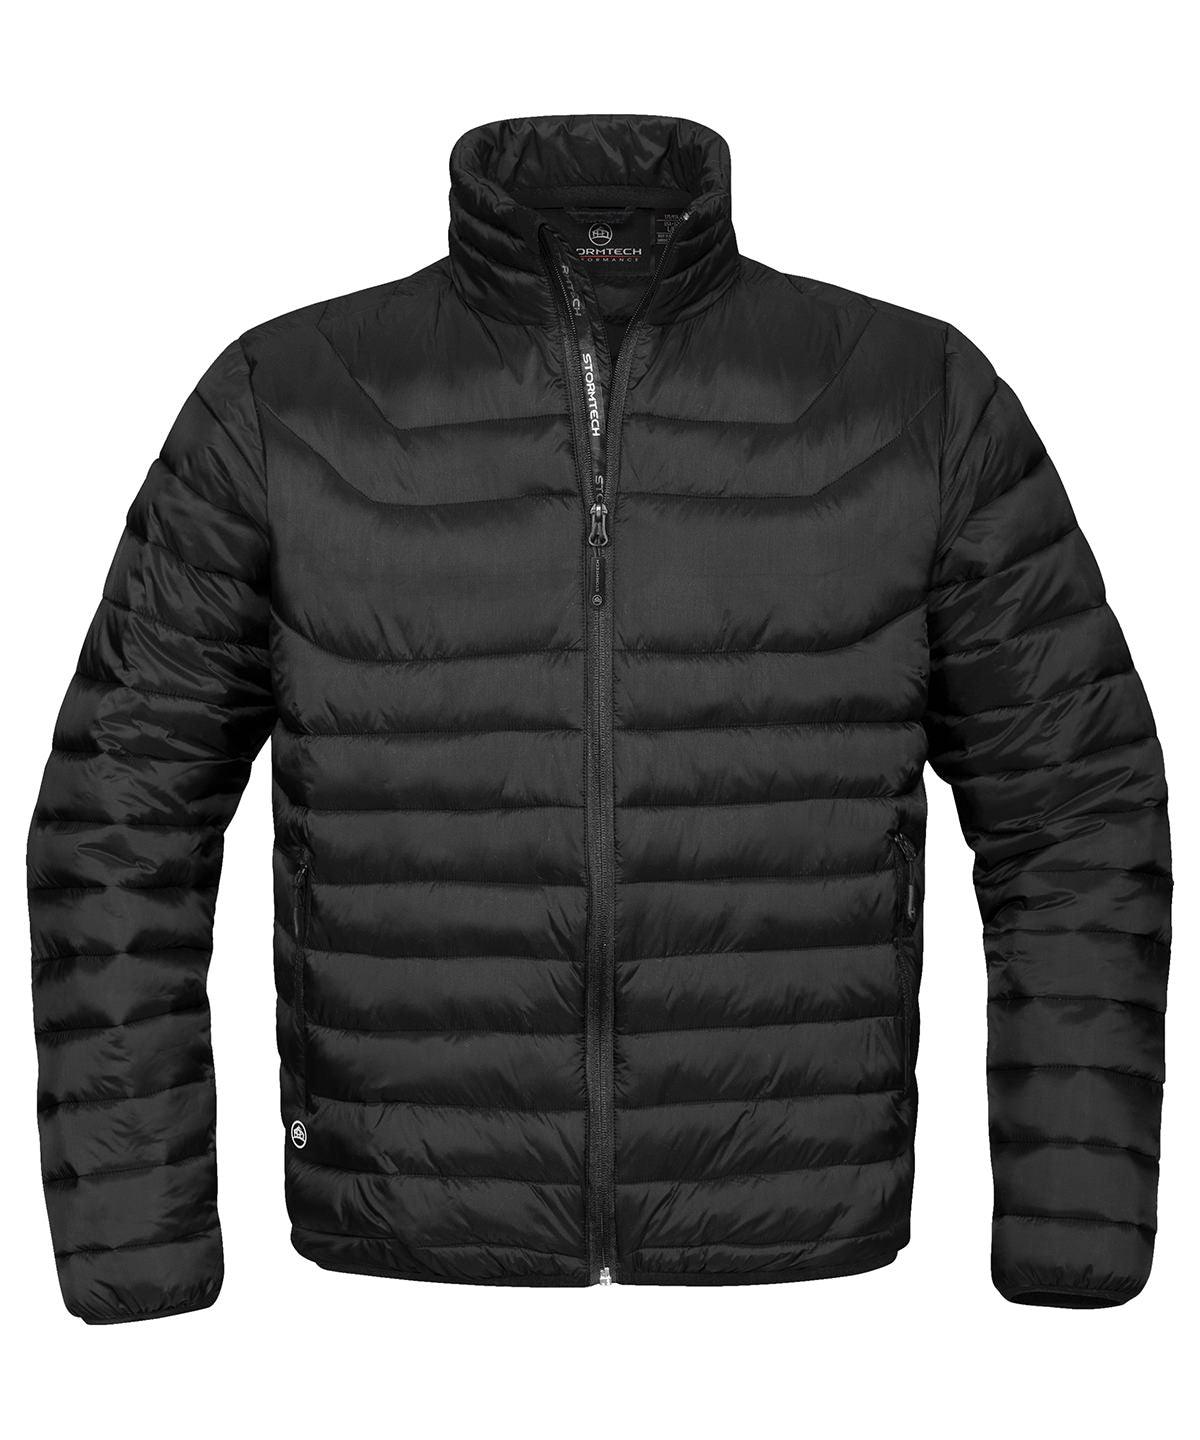 Black - Altitude jacket Jackets Stormtech Jackets & Coats, Must Haves, Padded & Insulation, Padded Perfection, Warm Clothing Schoolwear Centres